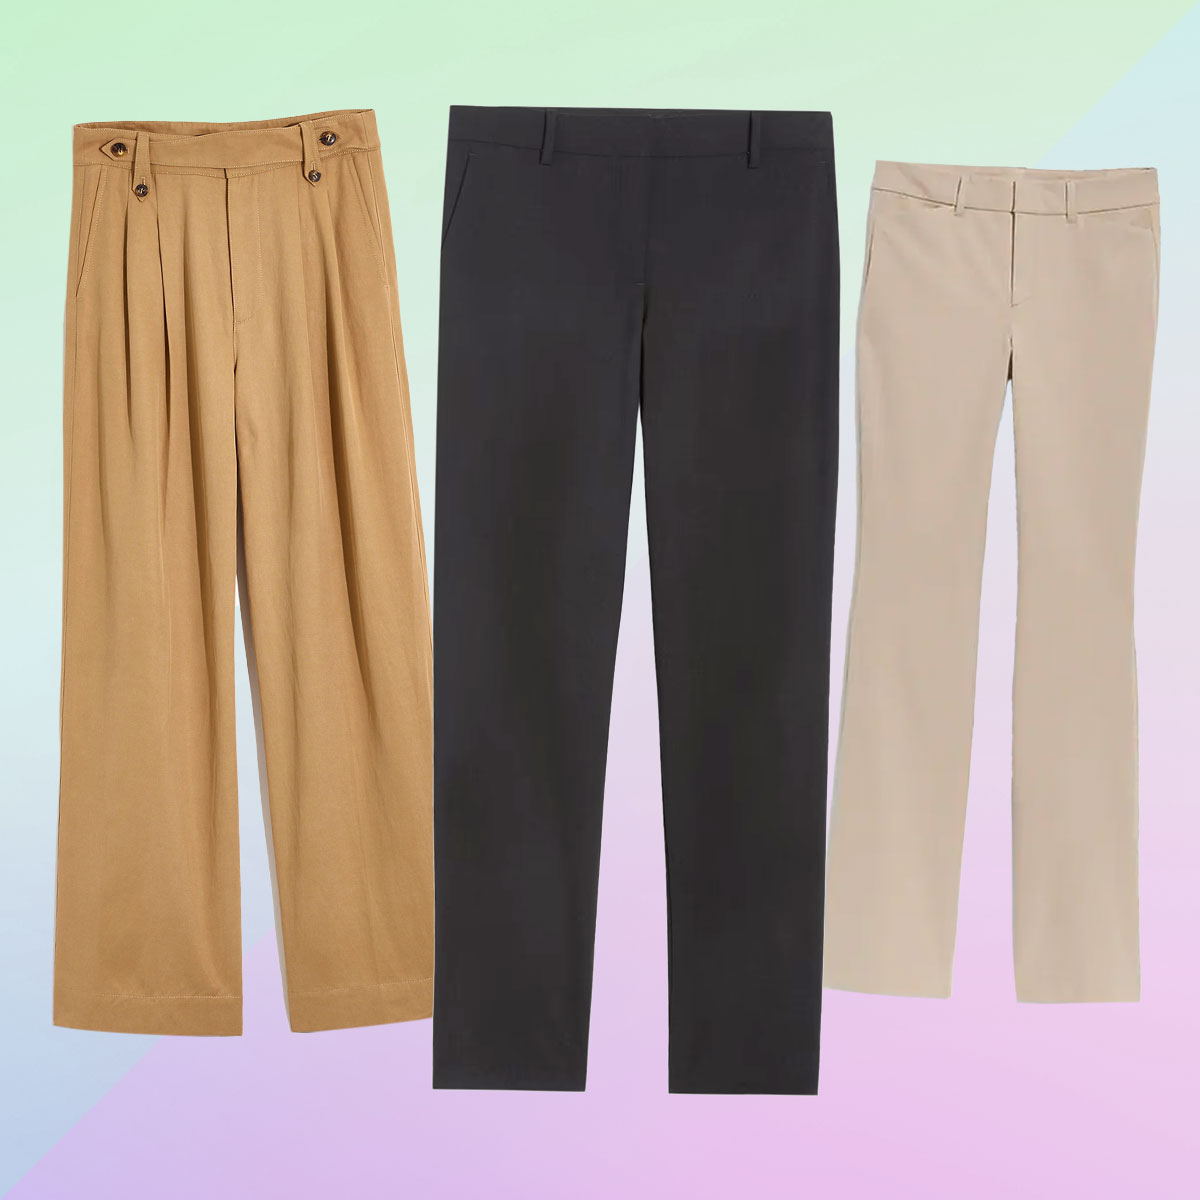 The 15 Best Work Pants For Women: Stay Comfy And Professional - SHEfinds